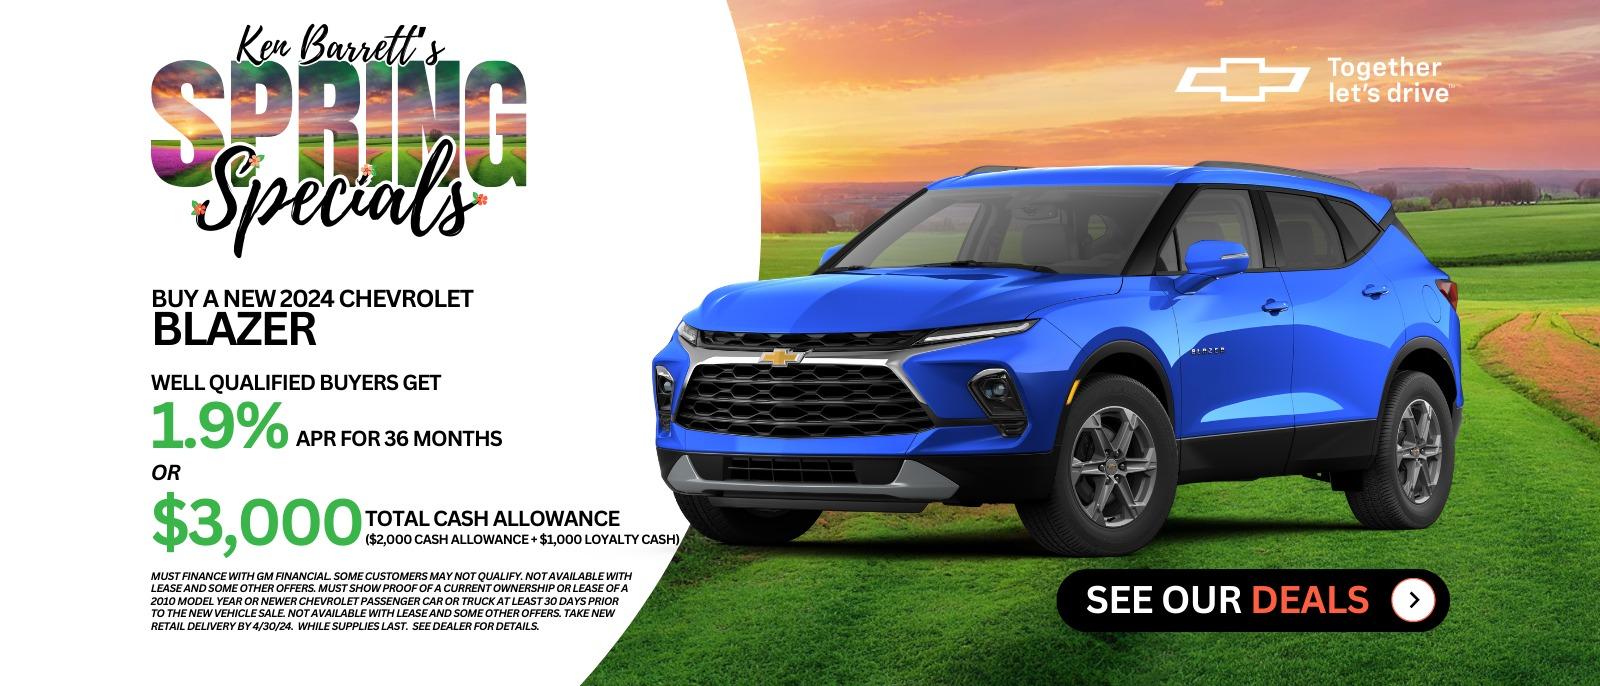 Ken Barrett's Spring Specials new deals on new Chevrolets in Batavia NY.  Find the Chevy deal for you.  Check out the new car deal on this brand new Chevrolet Blazer